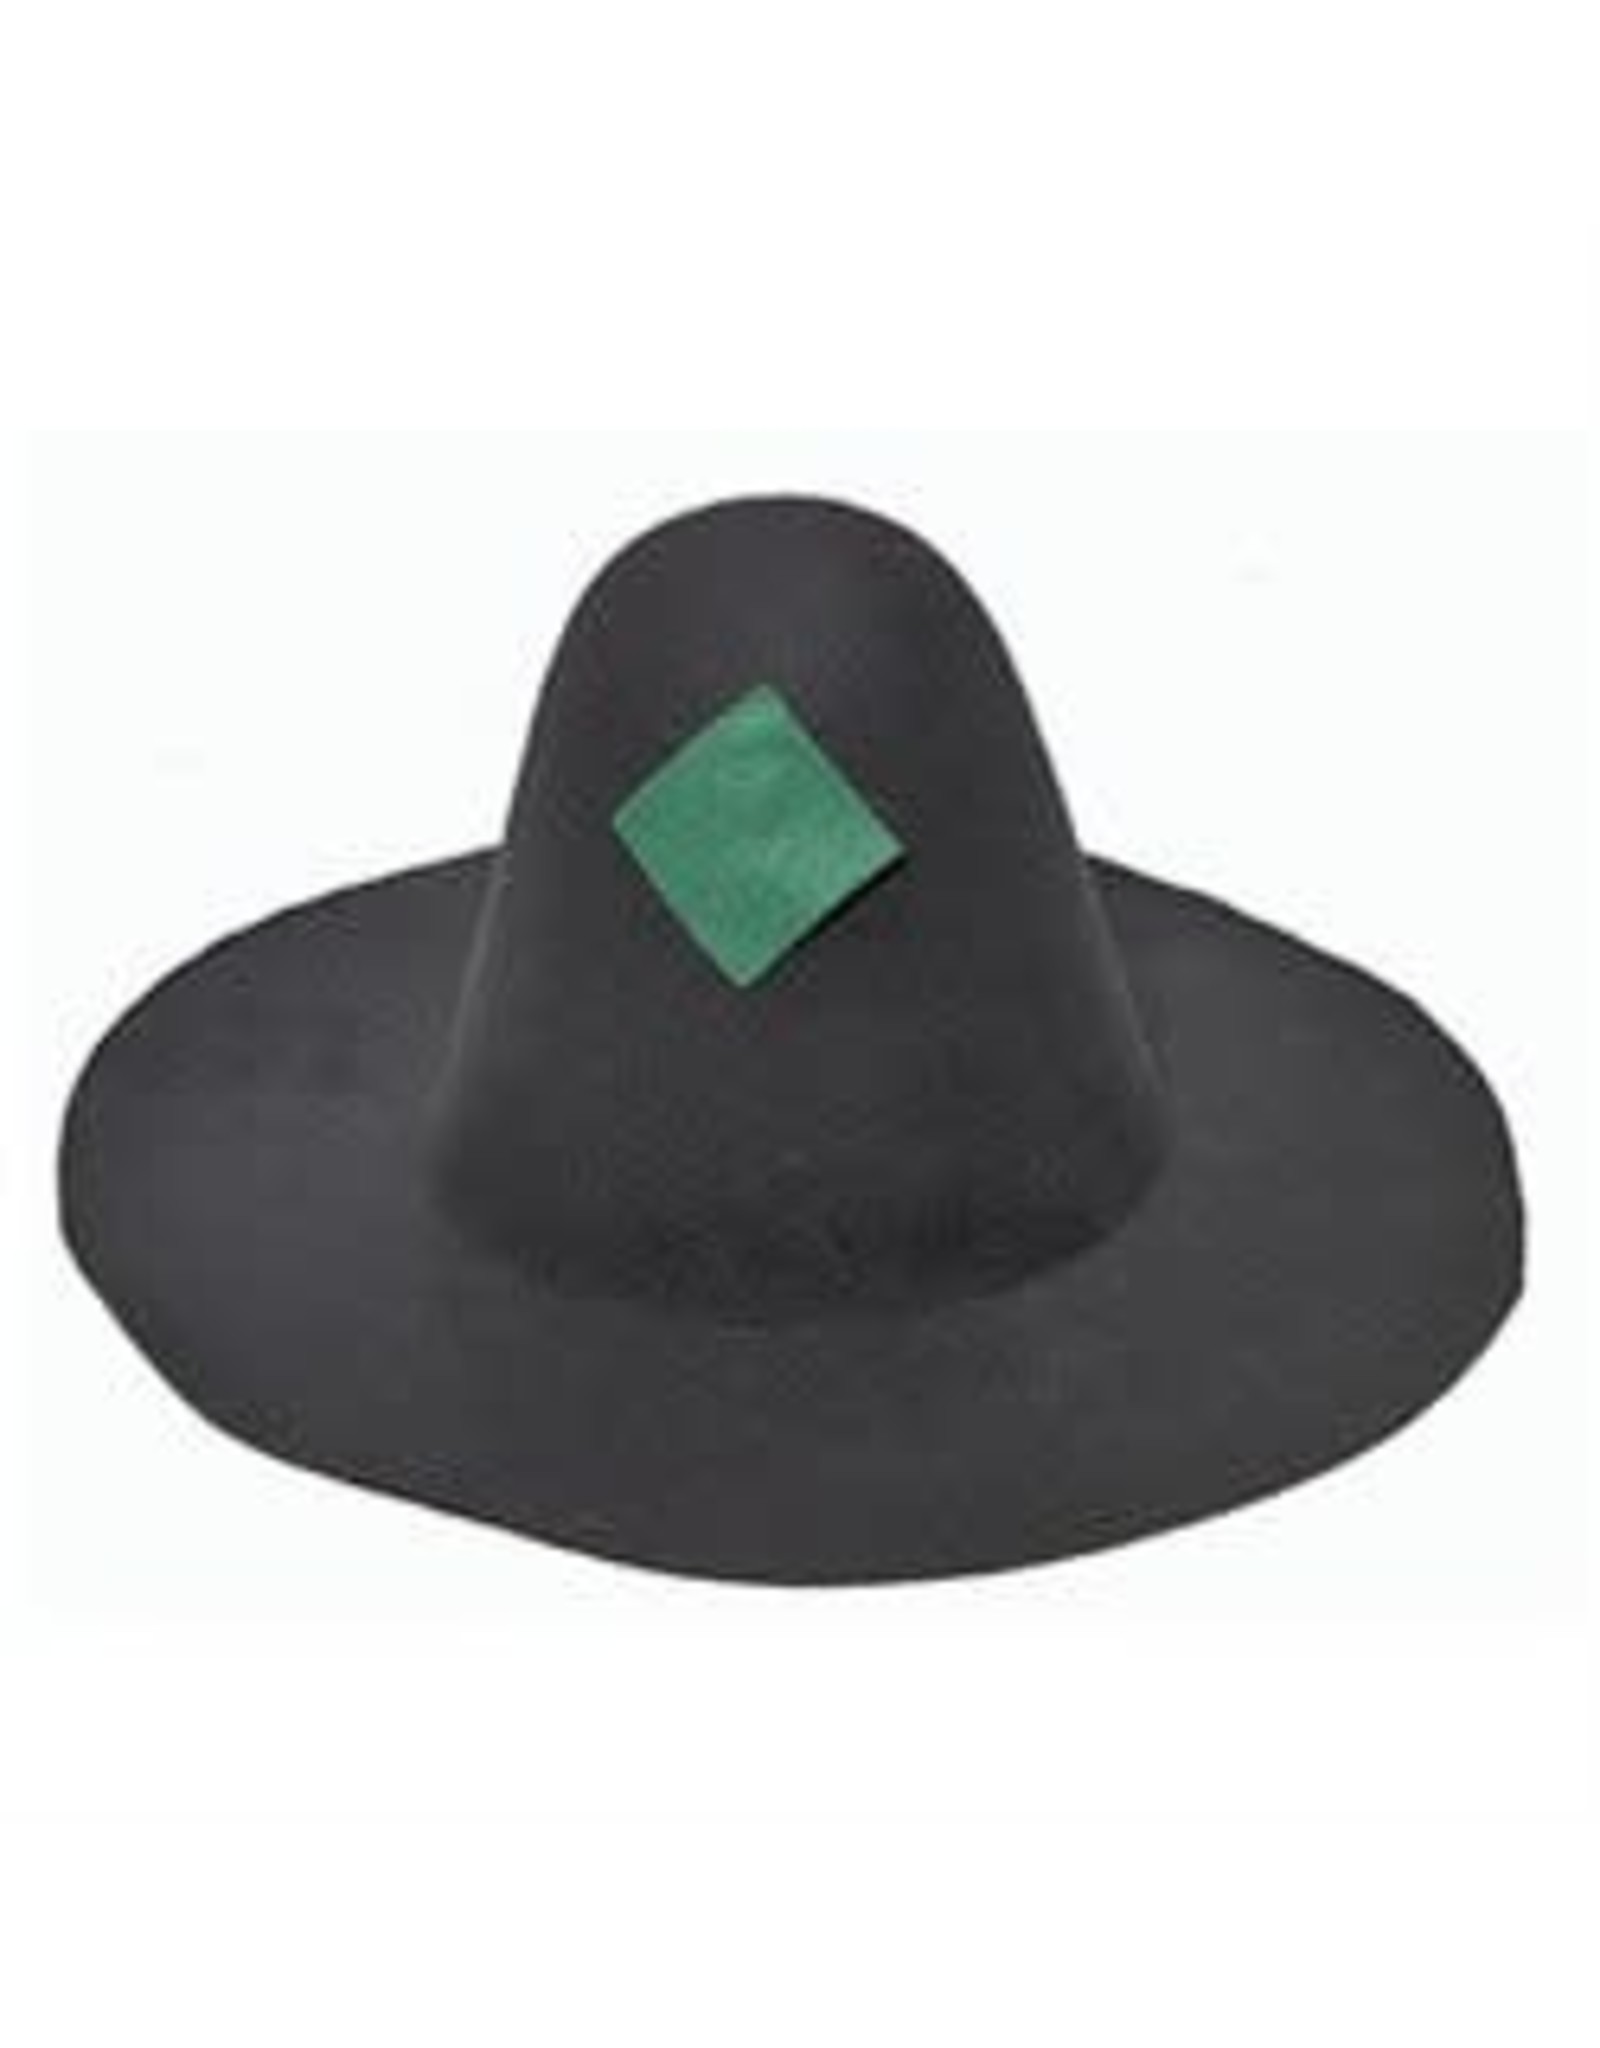 Jacobson Hat Co. SCARECROW HAT WITH PATCH